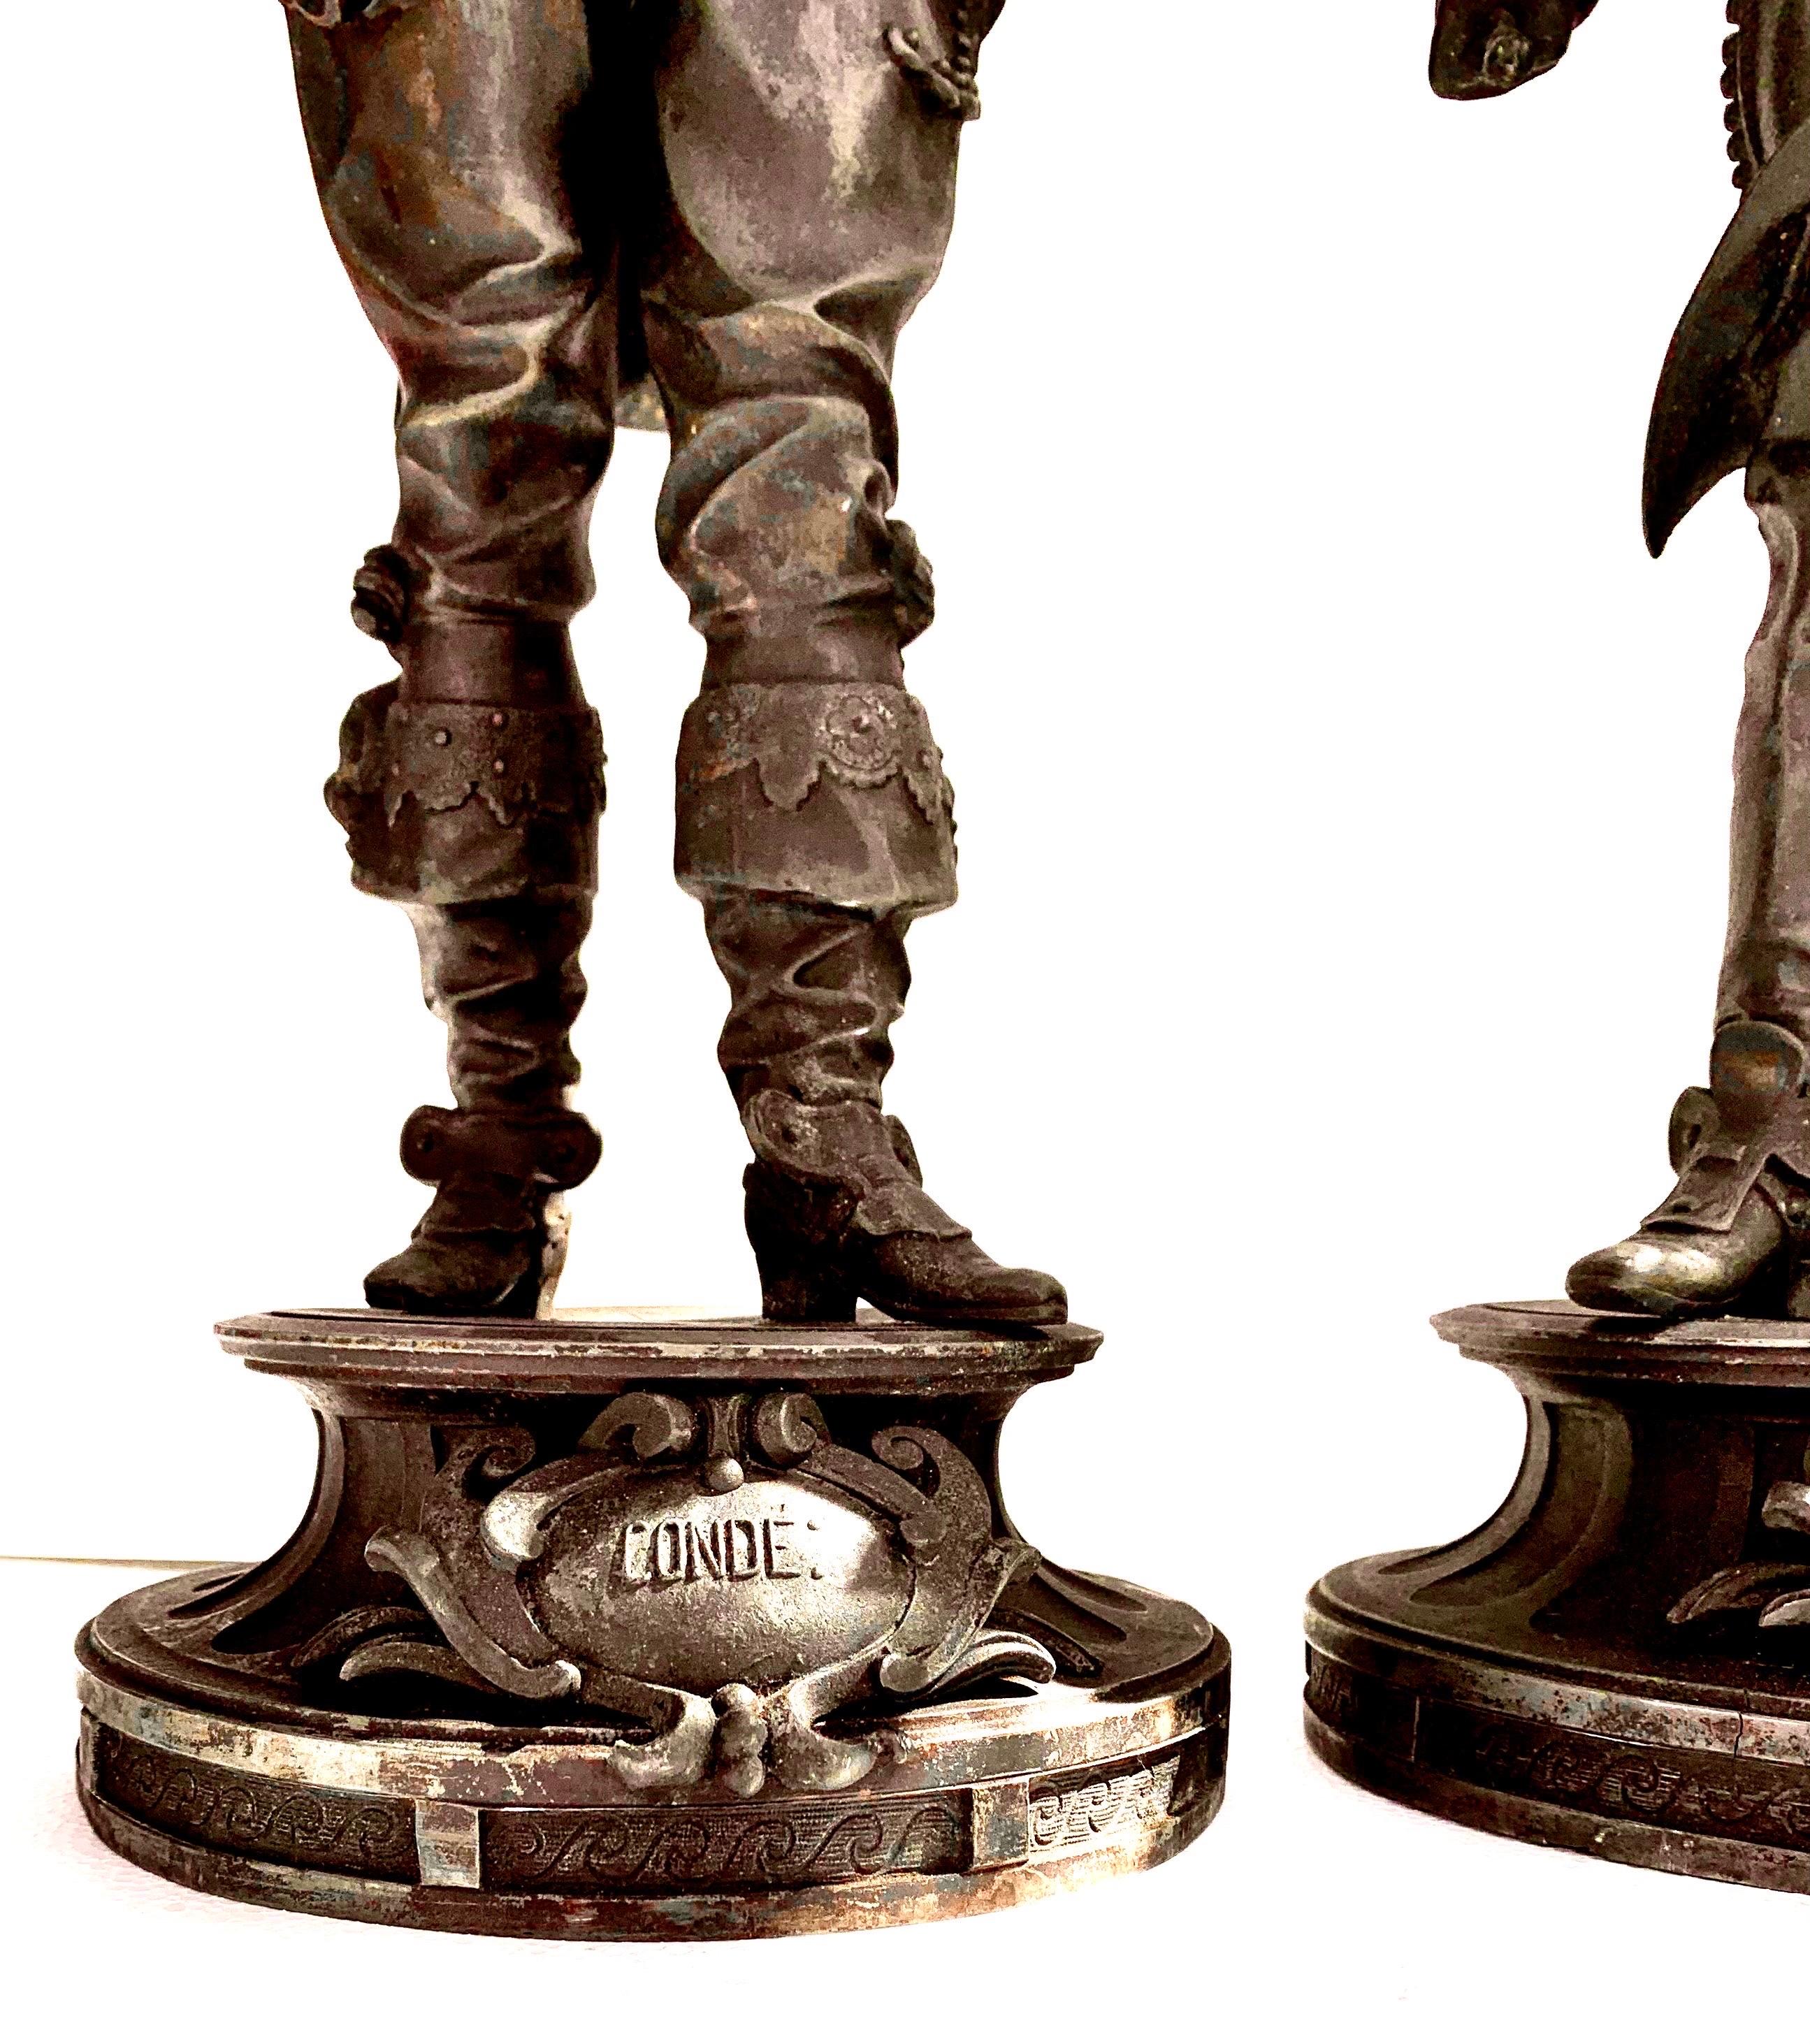 An antique pair of historical figures, Conde' and Vendome. Created in spelter with a patinated, bronze finish, they are a handsome and imposing pair dressed in full French regalia. These are displayed as a pair and history states that they are from